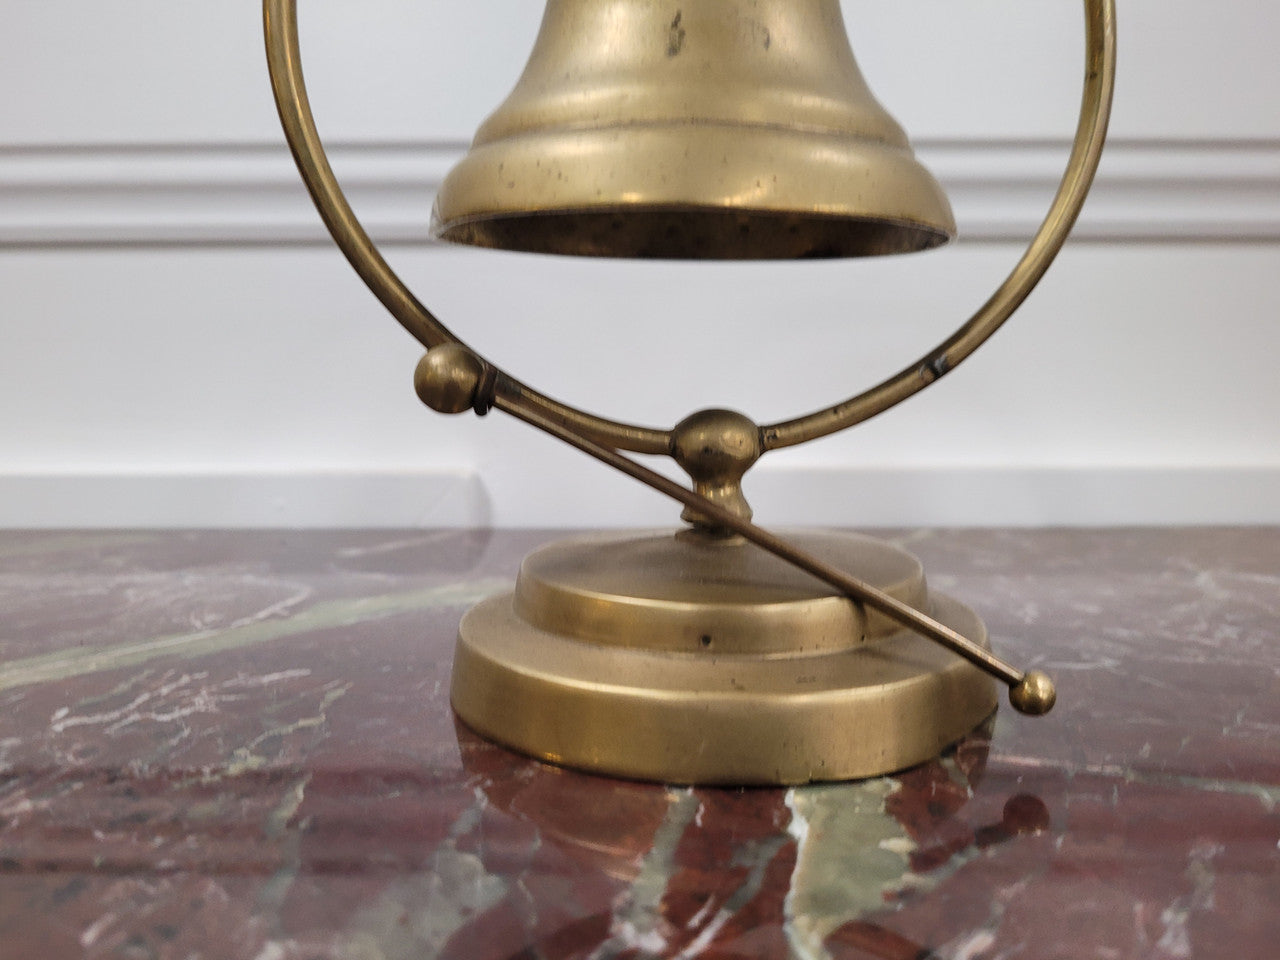 Victorian dinner bell, in good original condition. Please view photos as they help form part of the description.